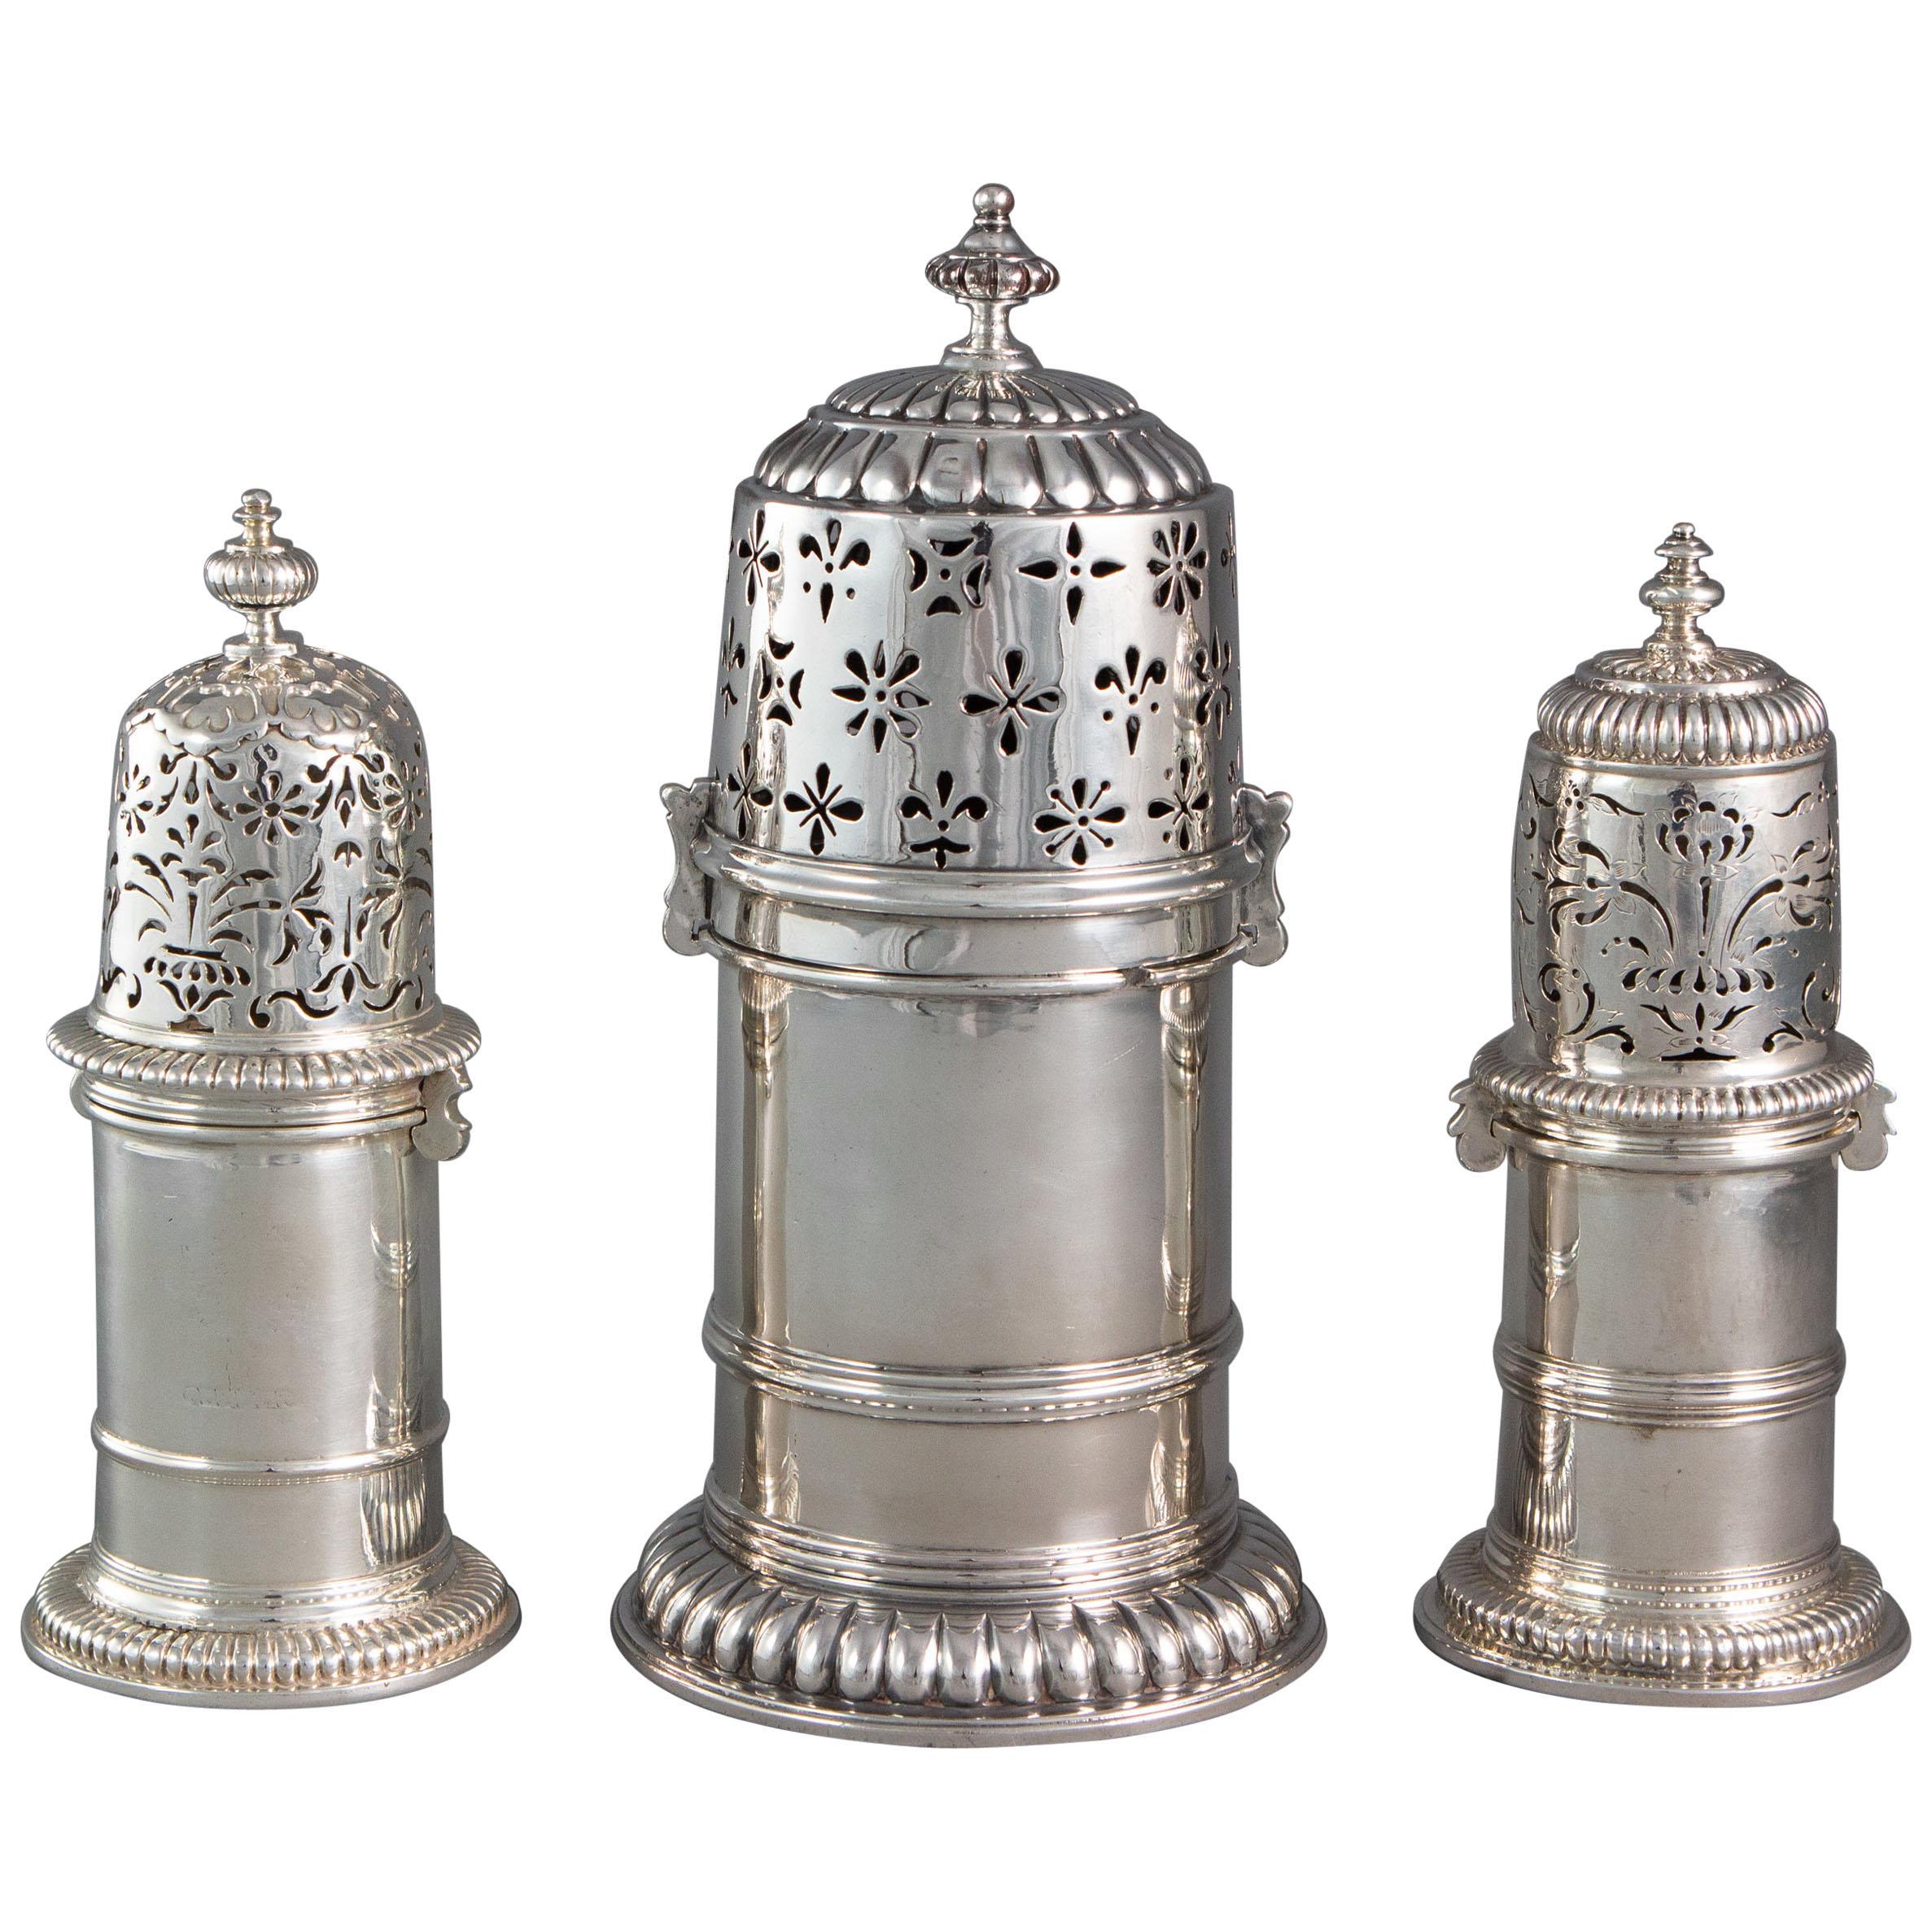 Matched Set of Three Late 17th Century Silver Casters